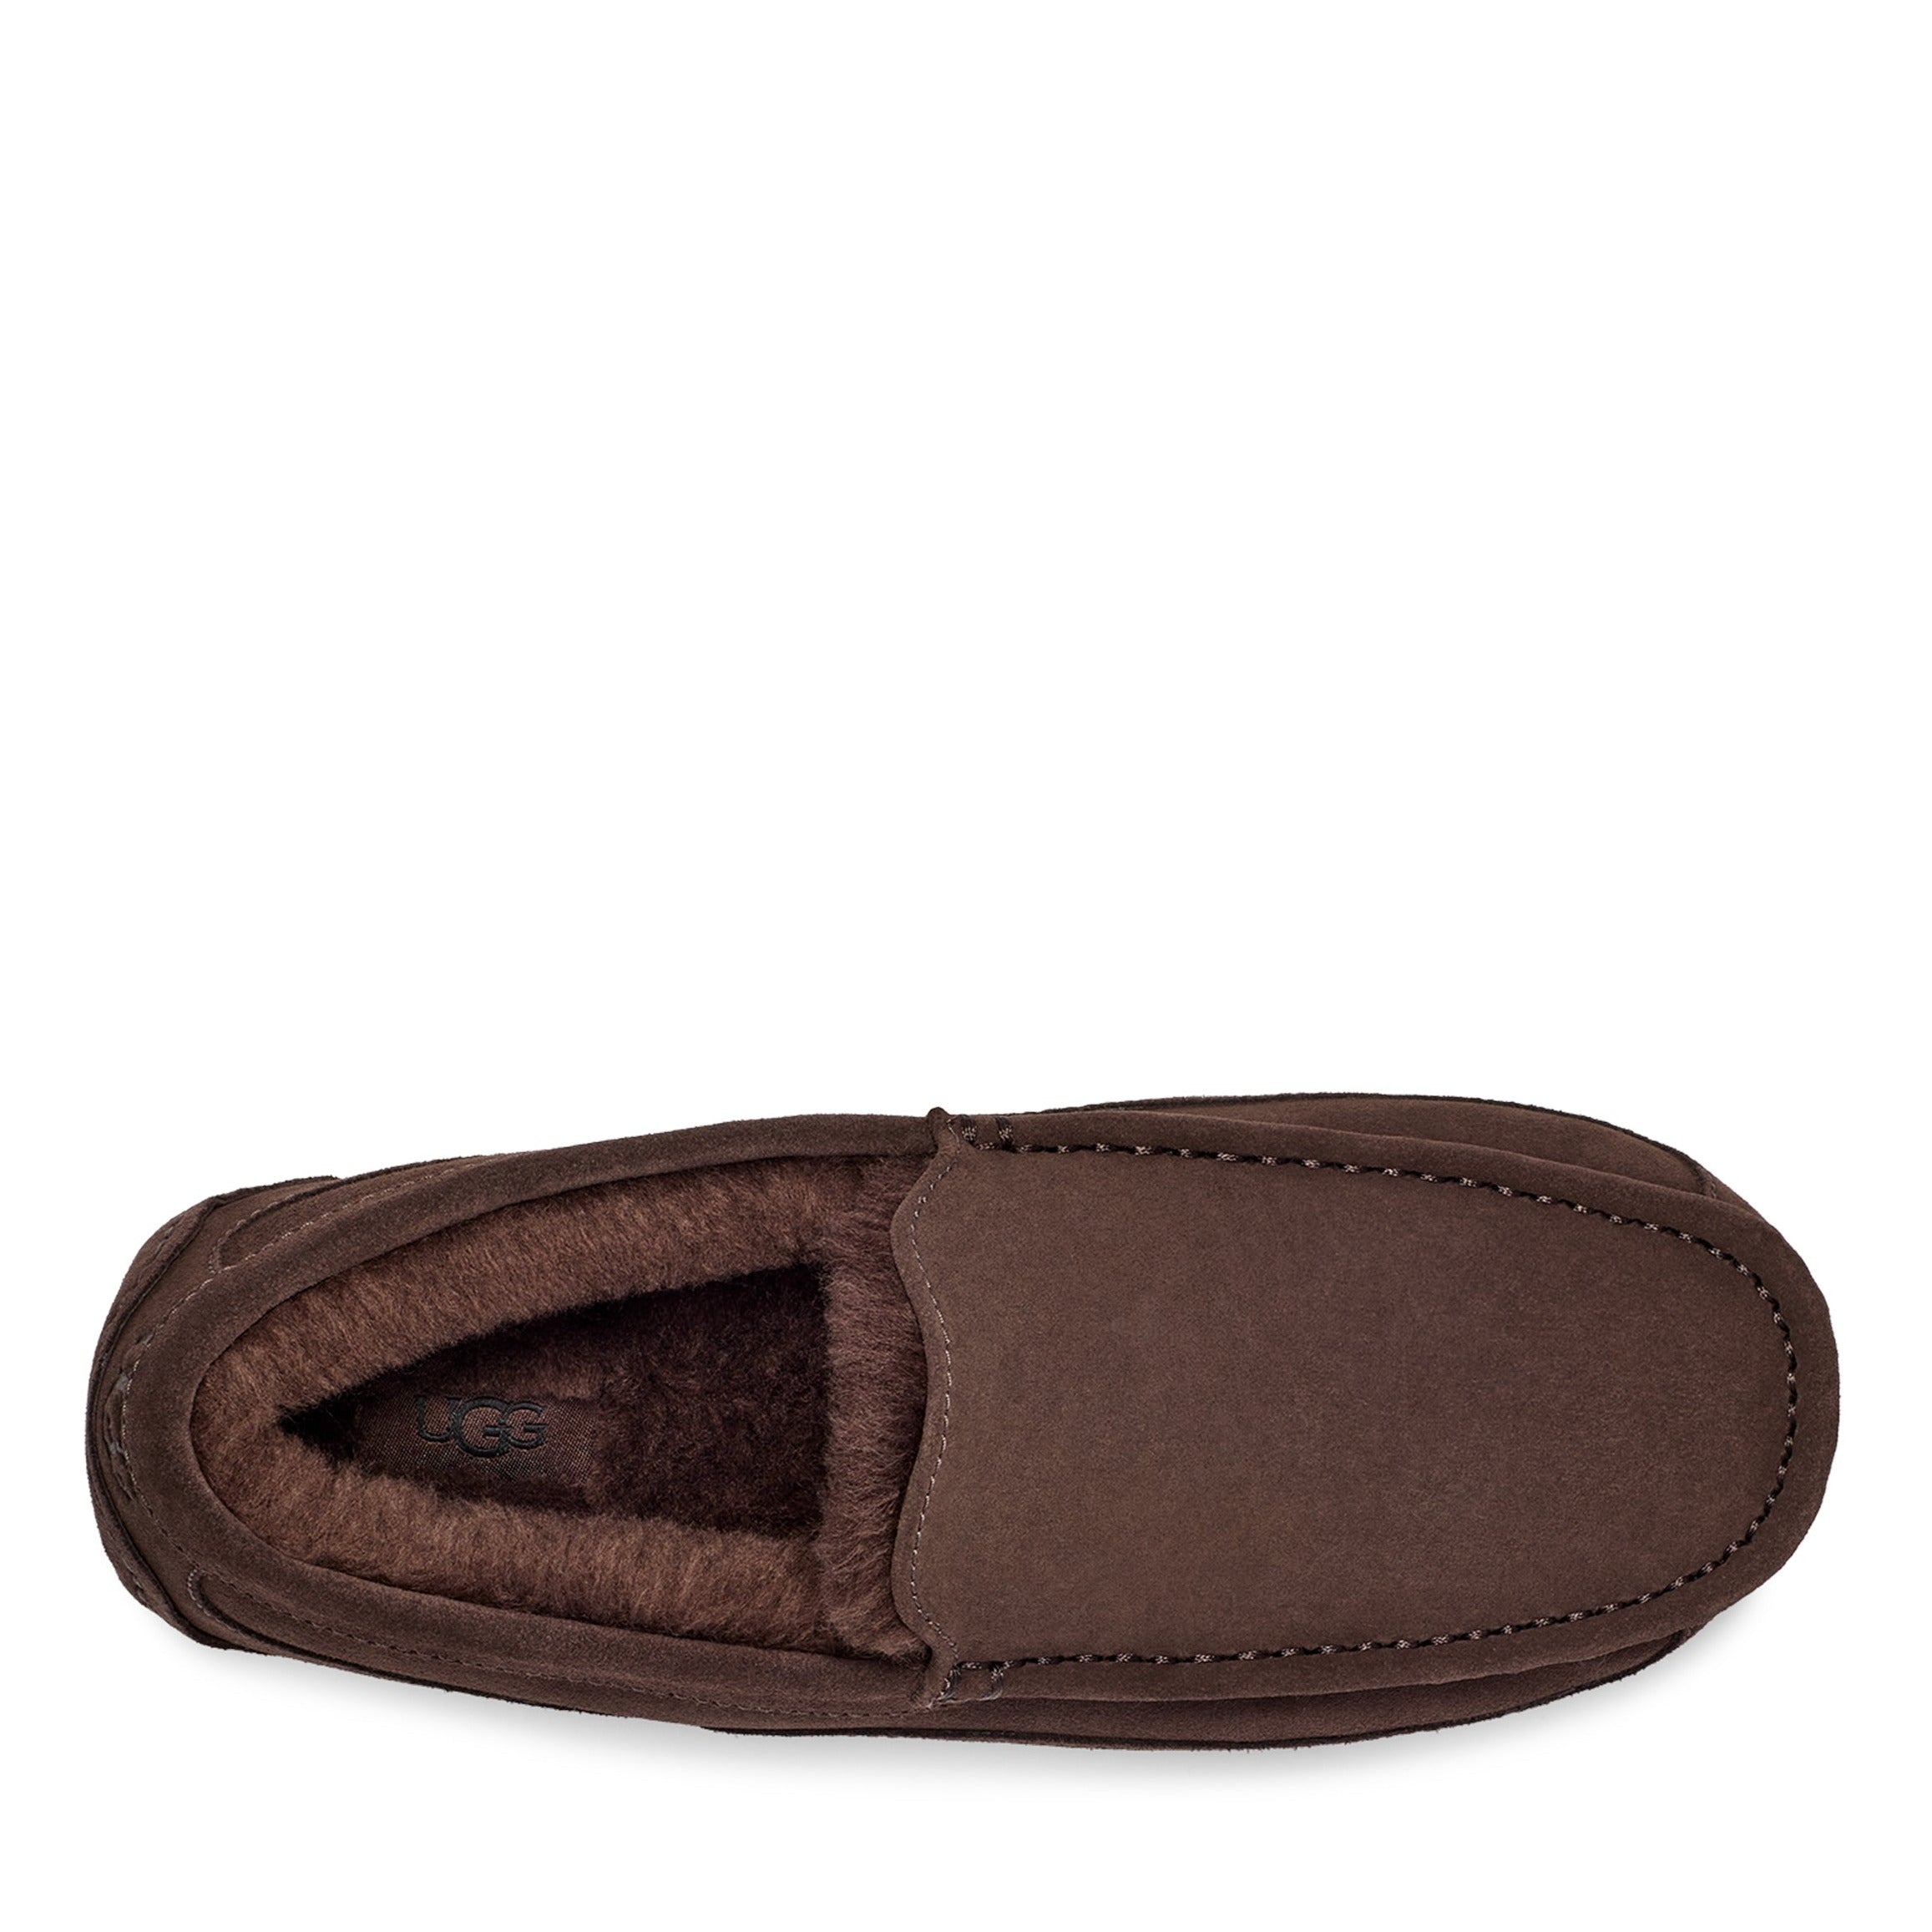 Sample UGG Ascot Loafers & Laceups   